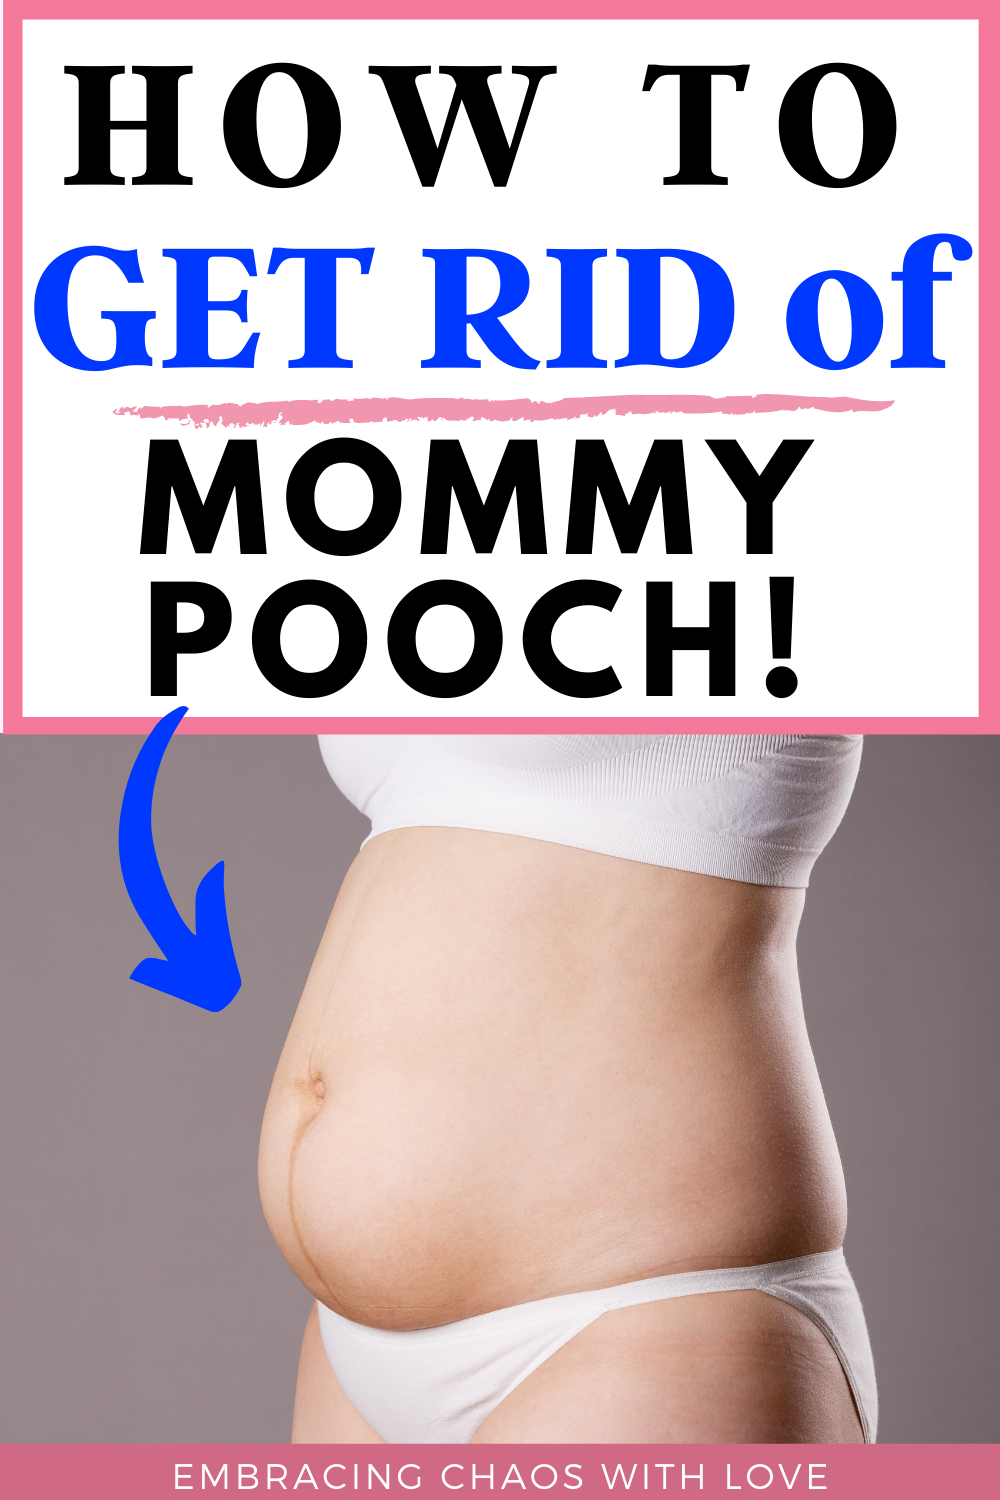 How to Get Rid of Mommy Pooch After Baby